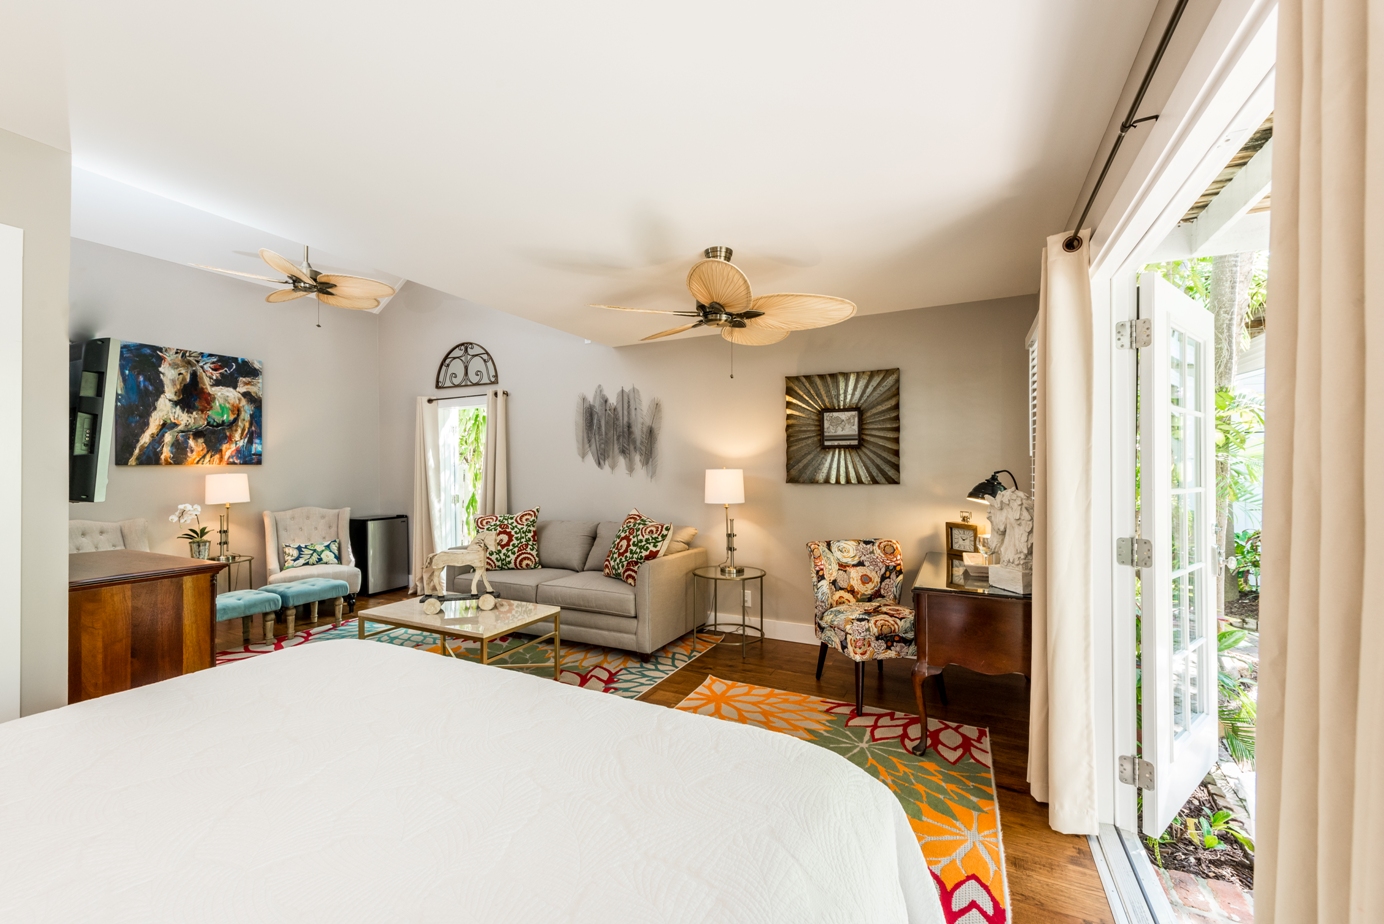 Key West Lodging - Saratoga Suite at Old Town Manor